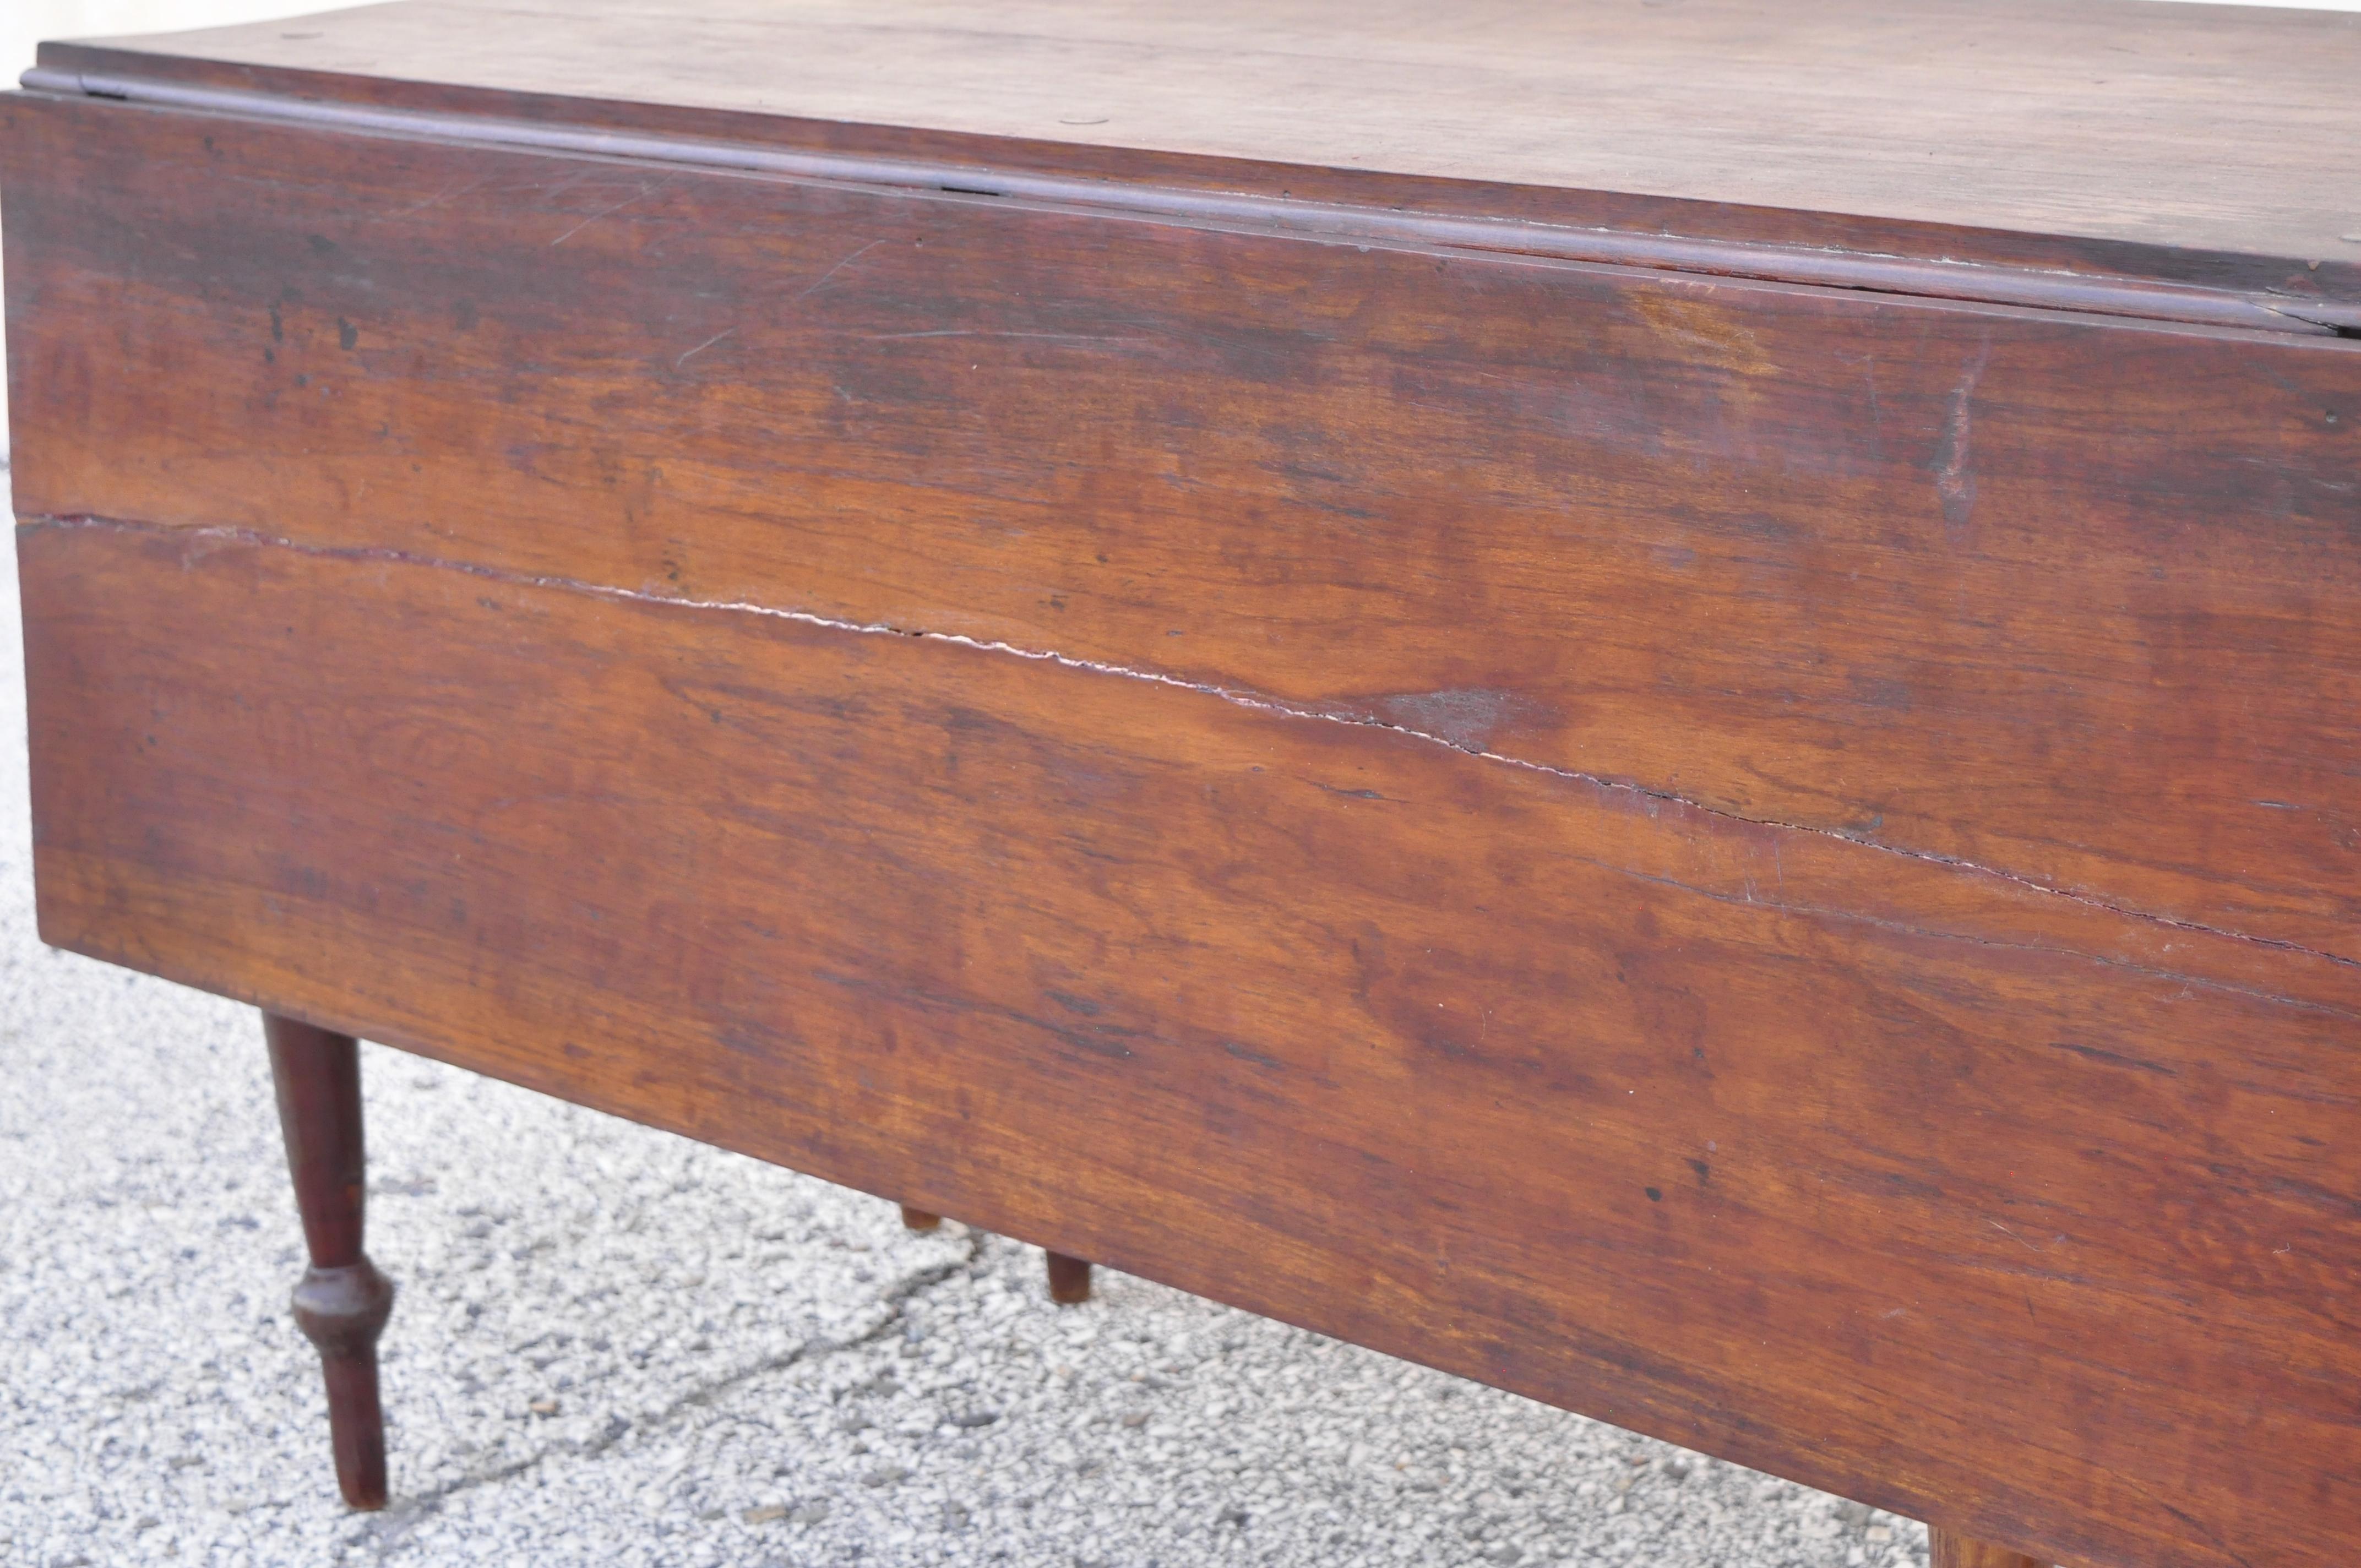 Antique 19th Century Colonial Walnut Drop Leaf Breakfast Dining Table w/ Drawer For Sale 2